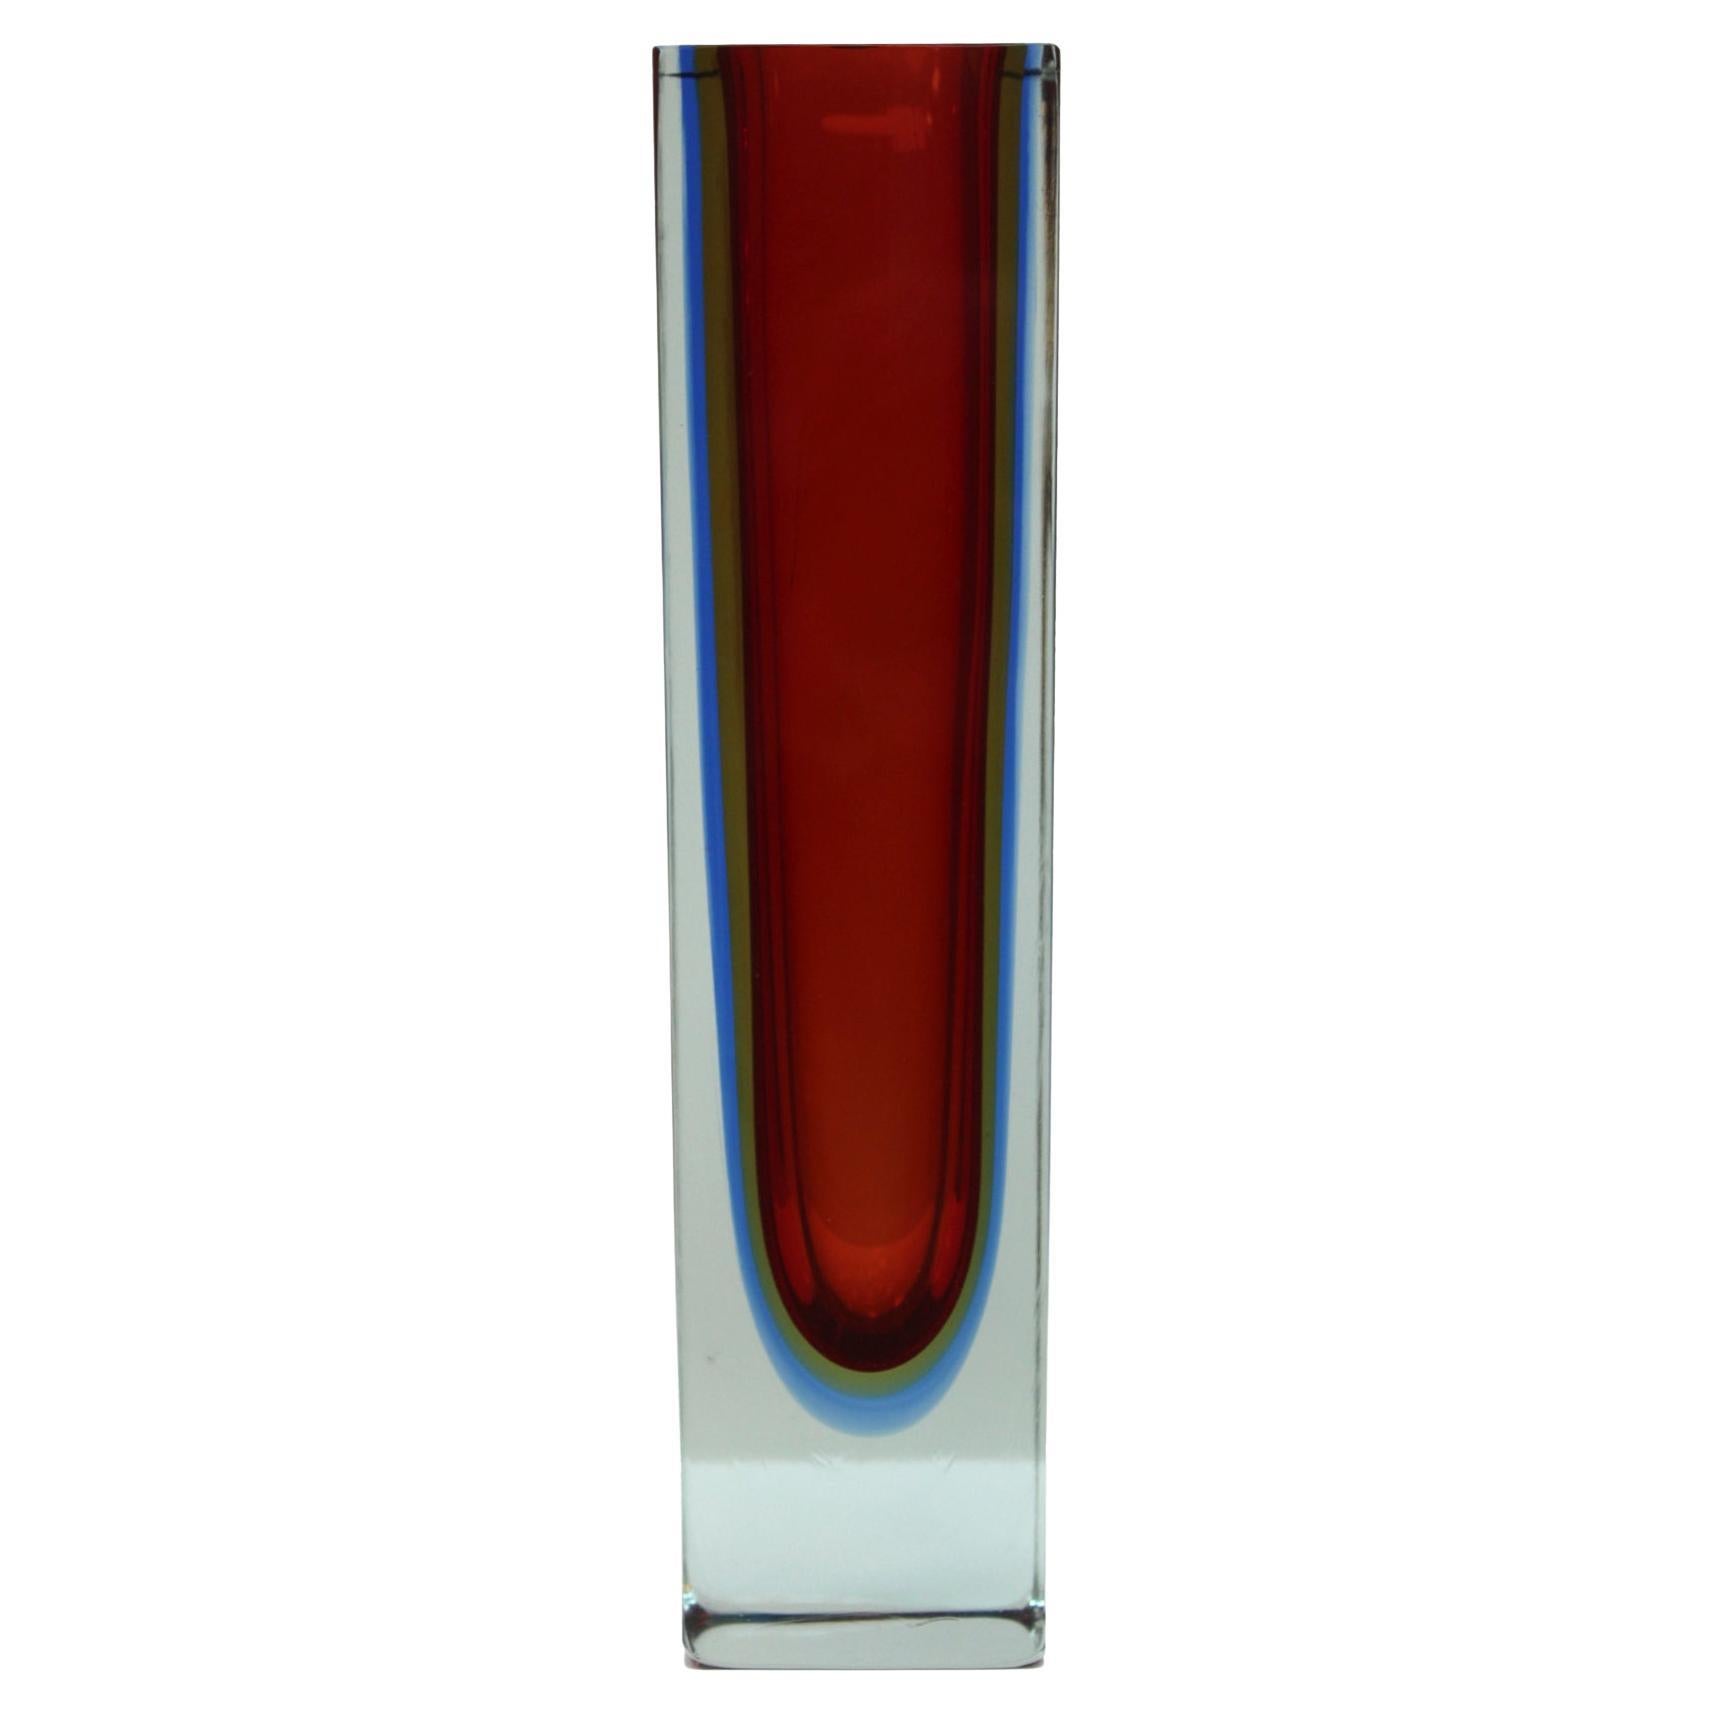 Mid-Century Modern Red and Blue Sommerso Murano Glass Vase by Flavio Poli 1950